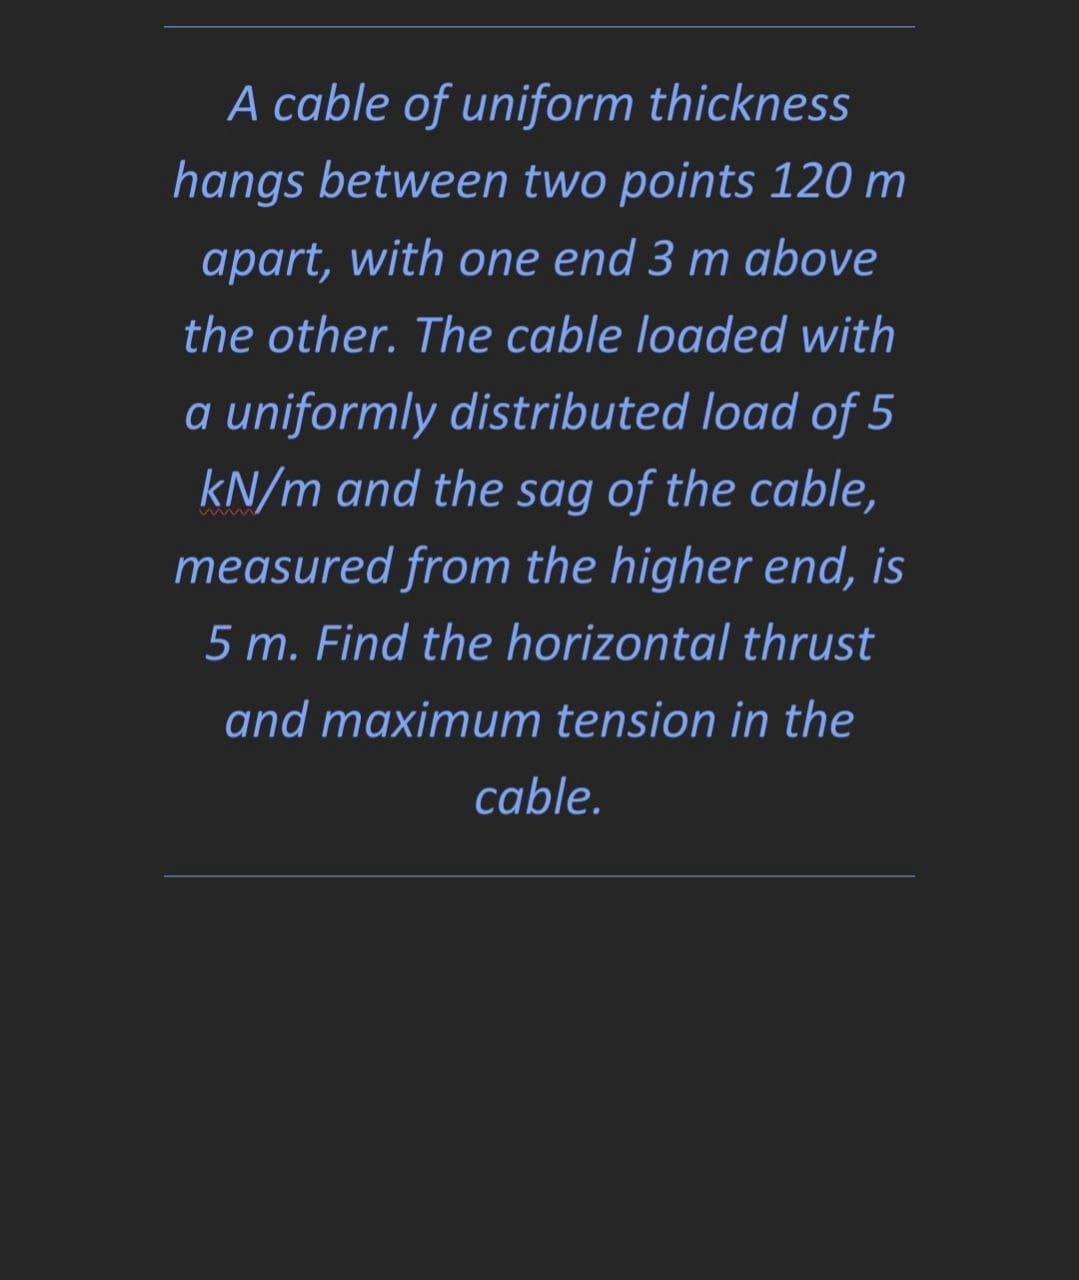 A cable of uniform thickness
hangs between two points 120 m
apart, with one end 3 m above
the other. The cable loaded with
a uniformly distributed load of 5
kN/m and the sag of the cable,
measured from the higher end, is
5 m. Find the horizontal thrust
and maximum tension in the
cable.
